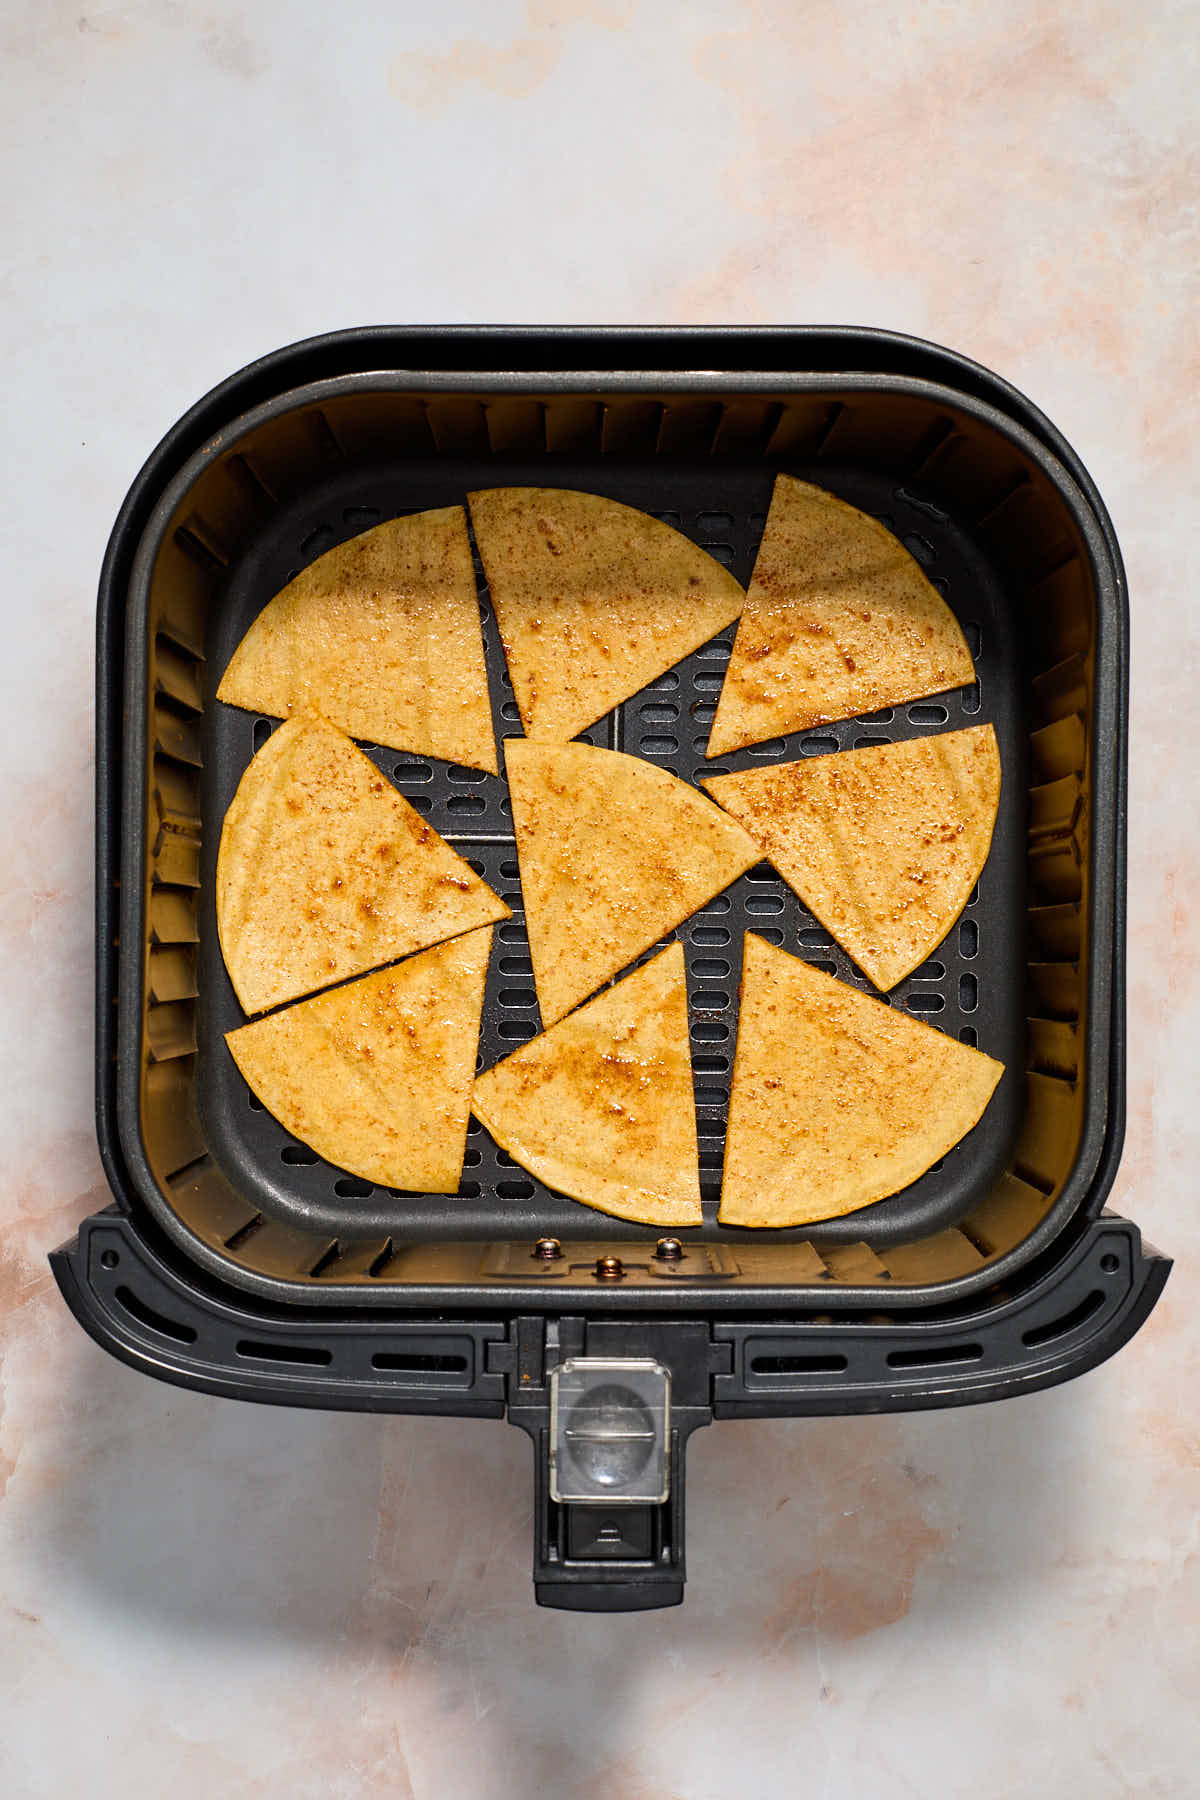 Tortilla triangles arranged in a single layer in the bottom of an air fryer basket.